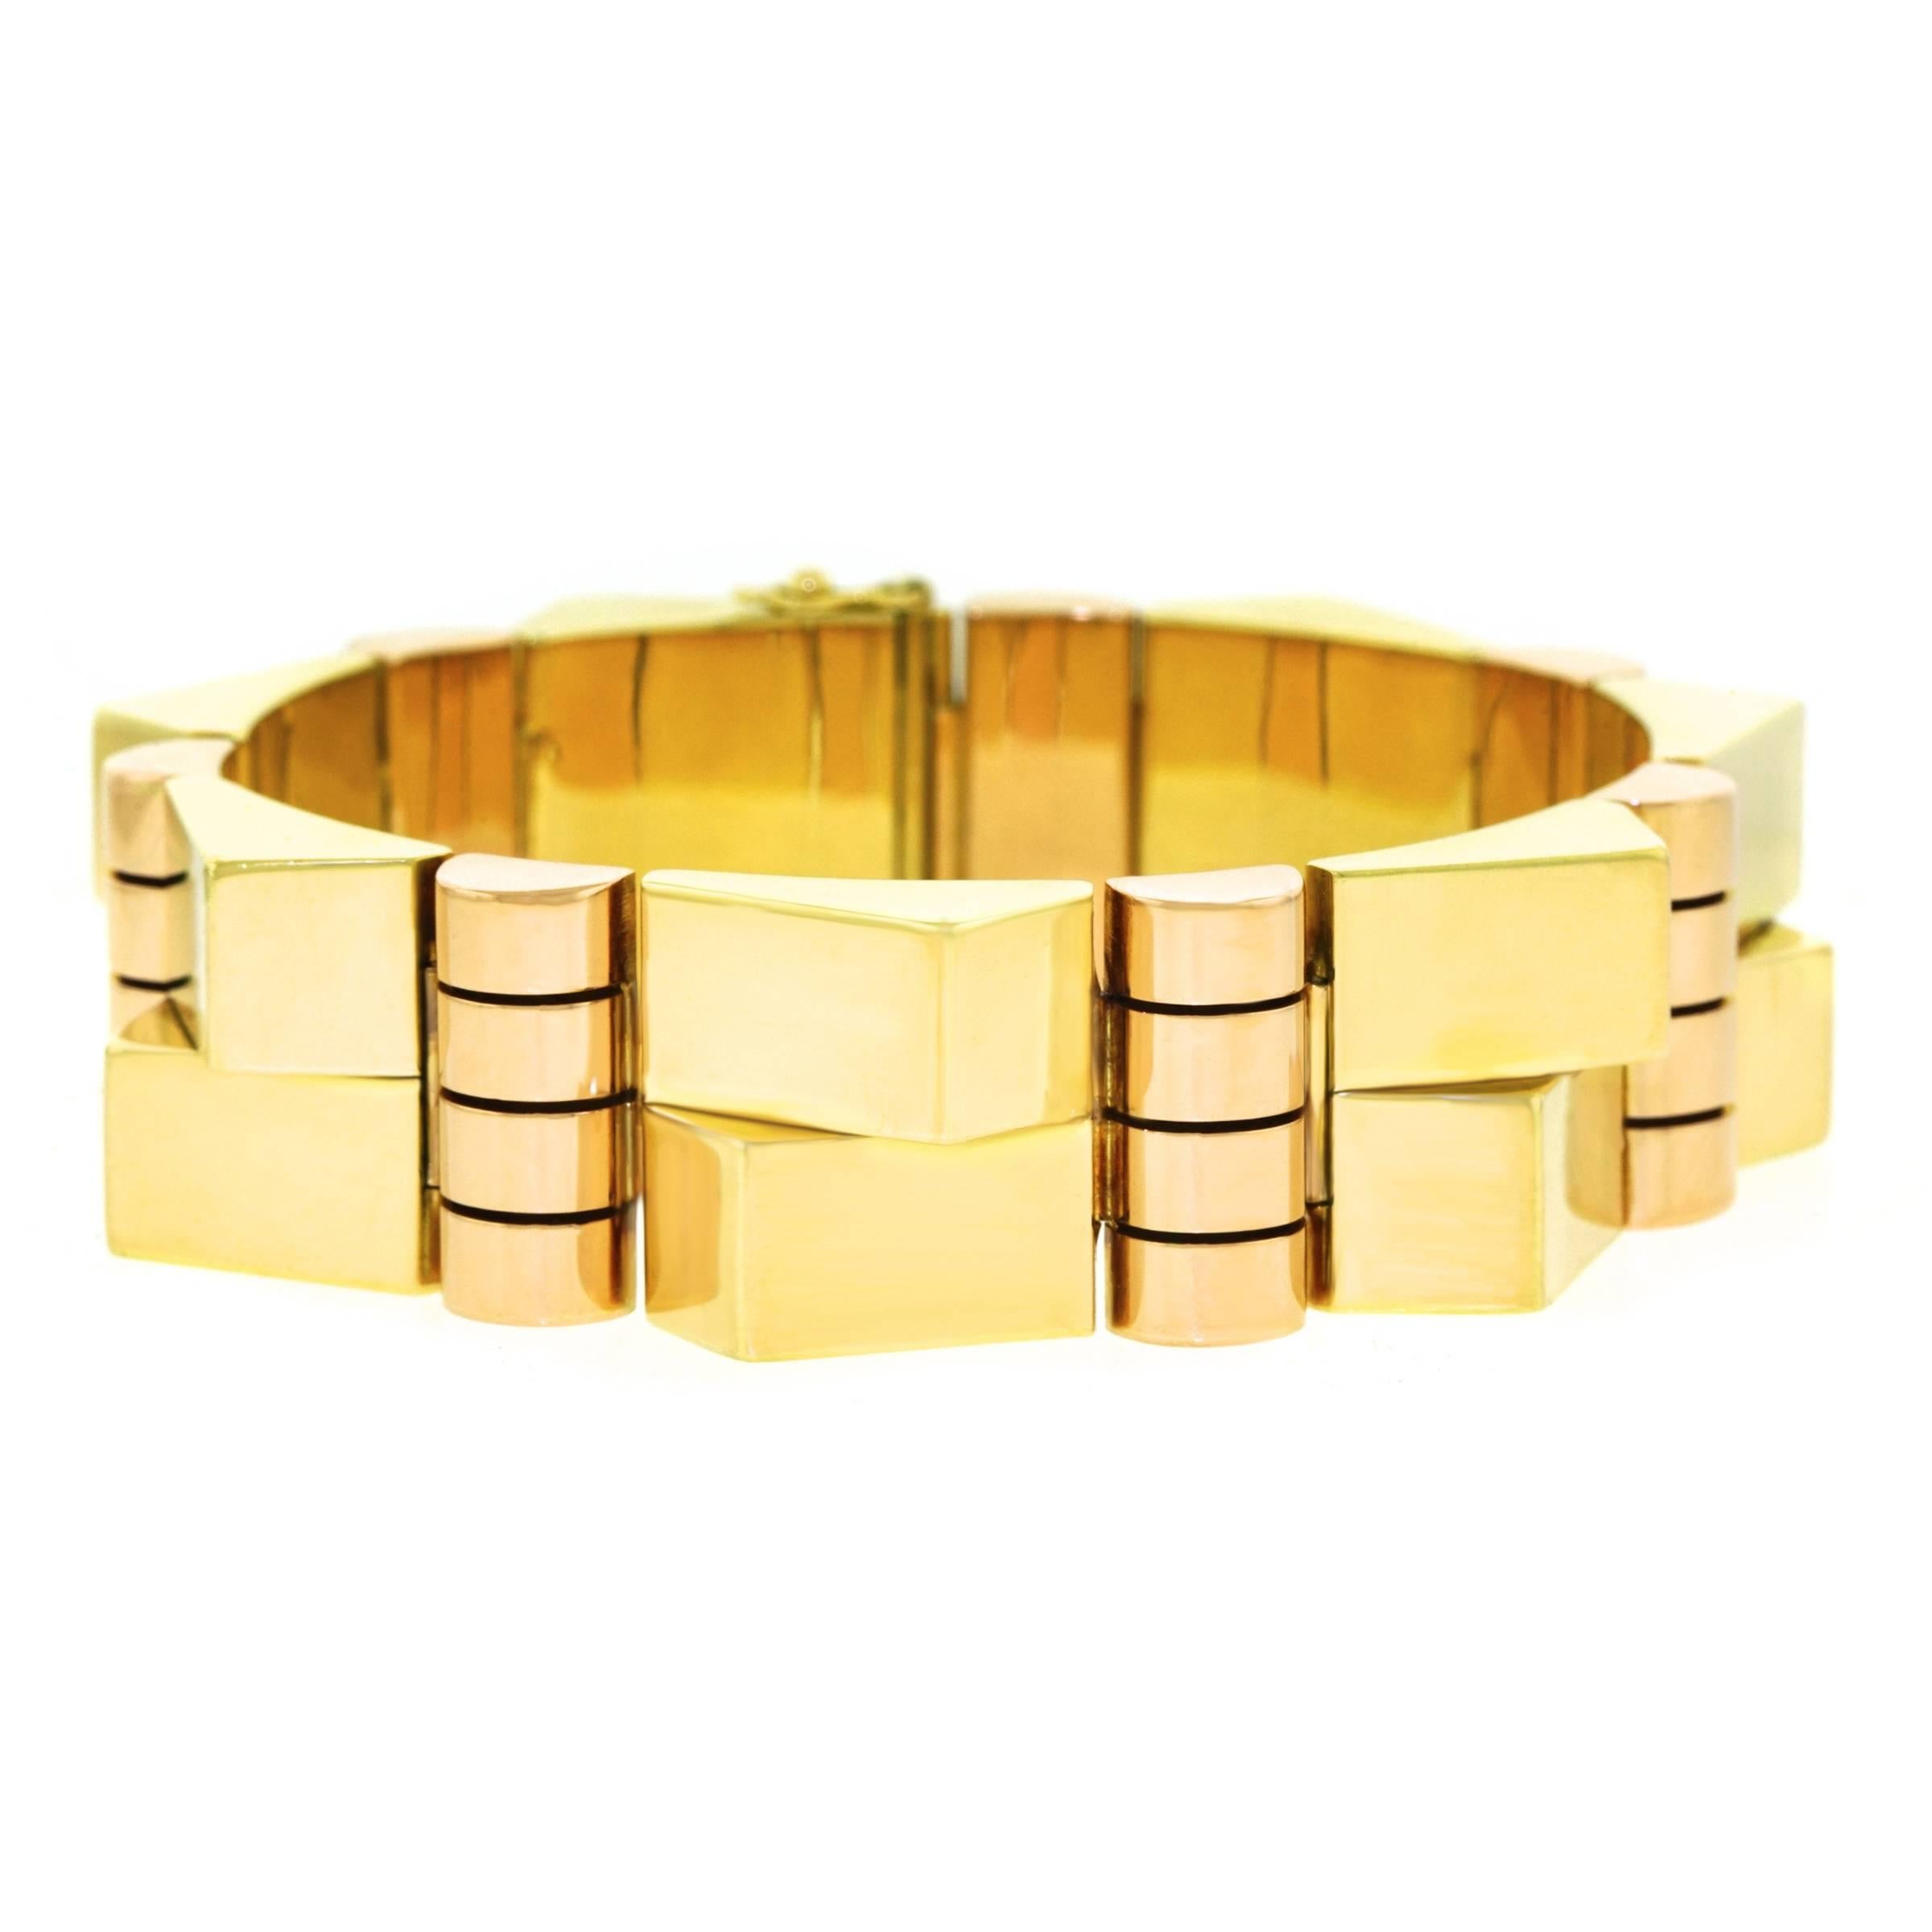 Incredible French Art Deco Gold Bracelet